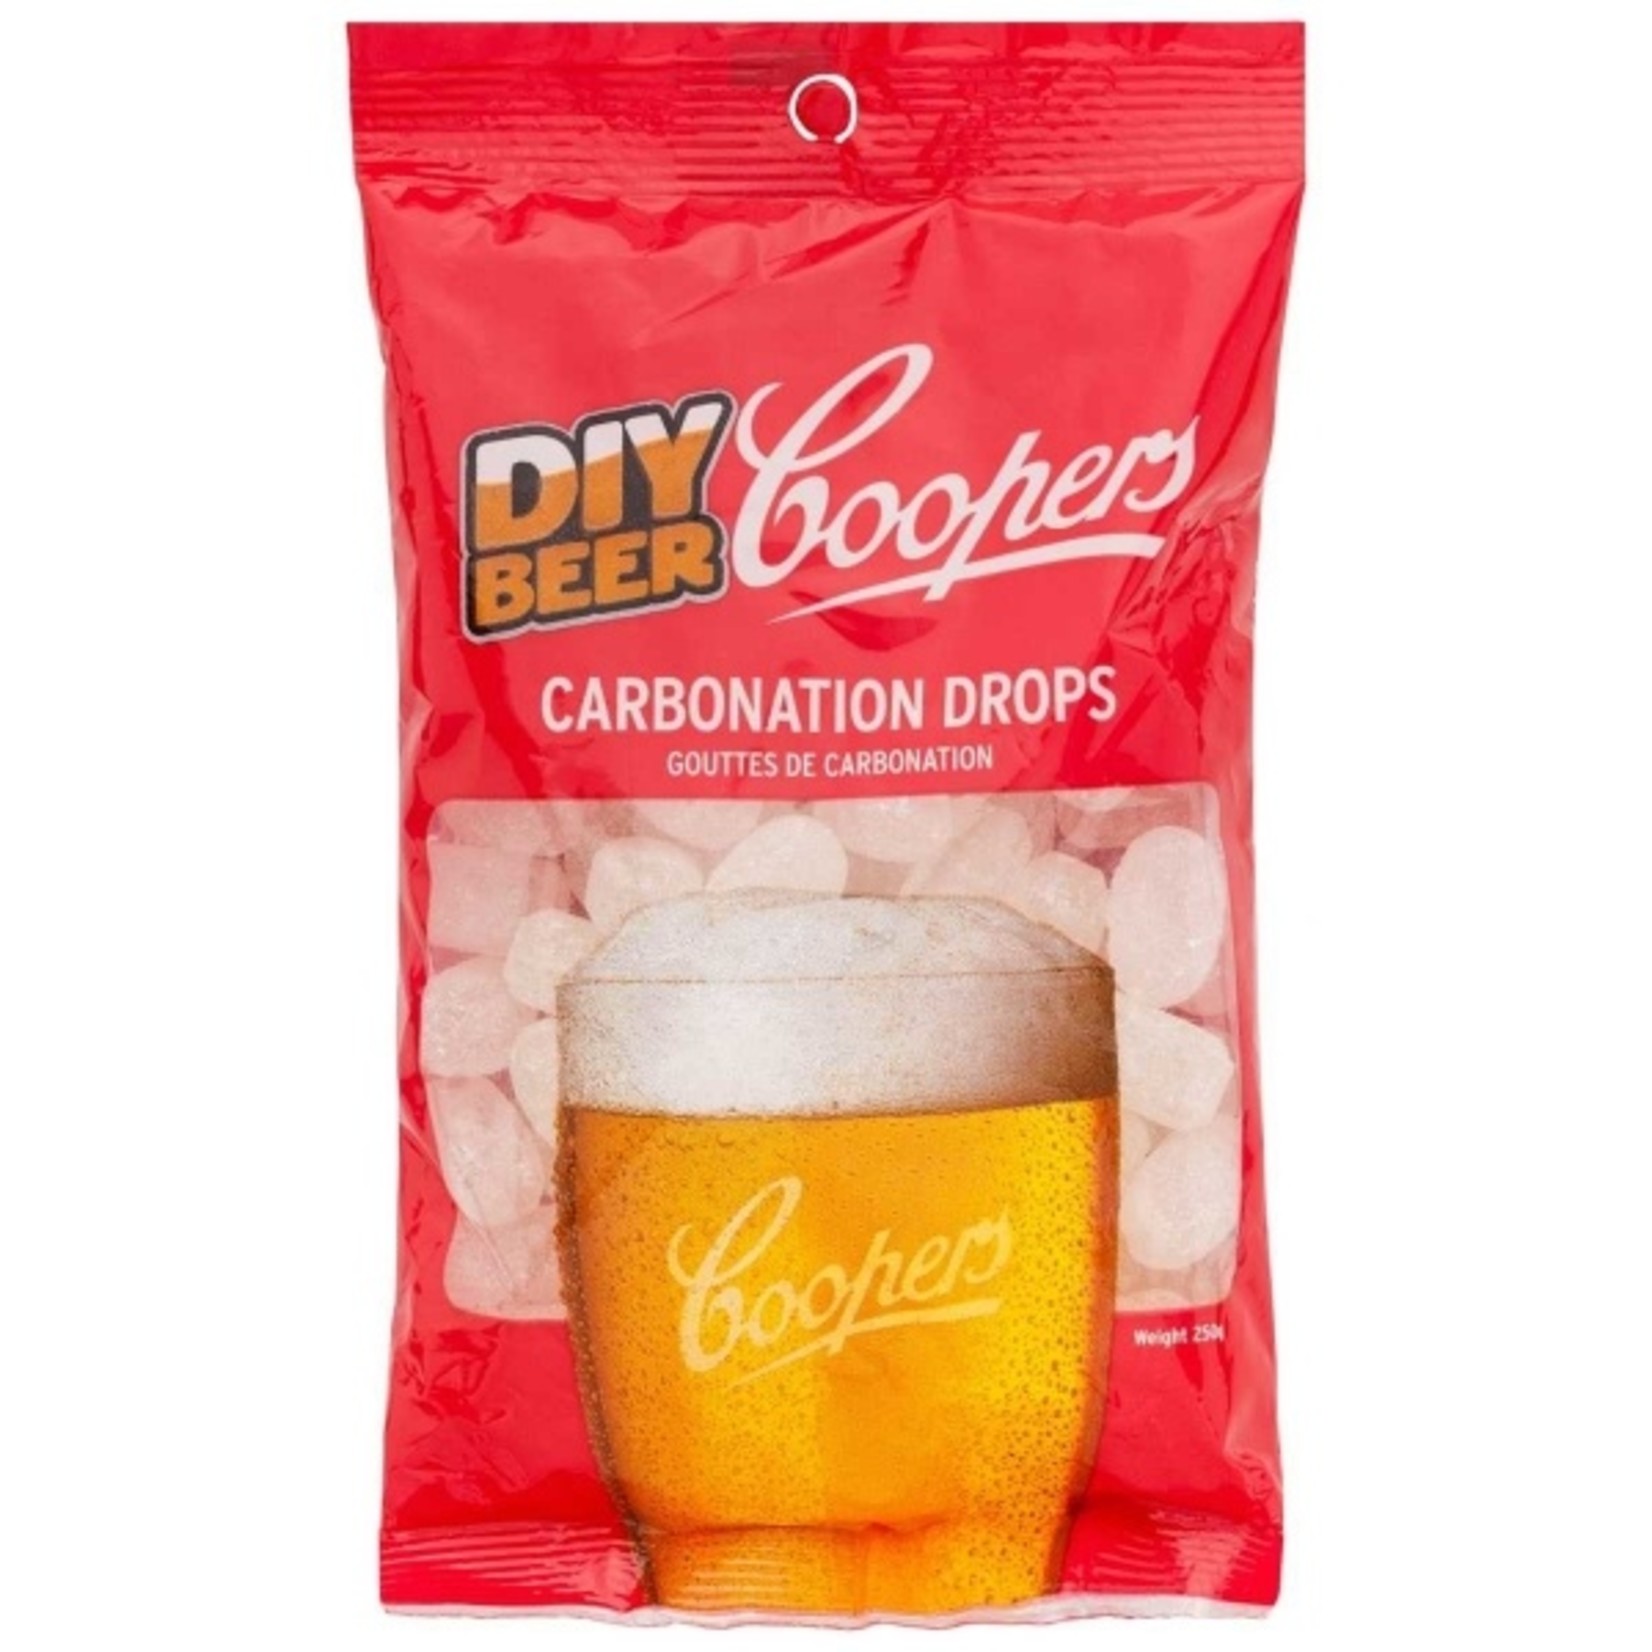 Coopers Carbonation Drops